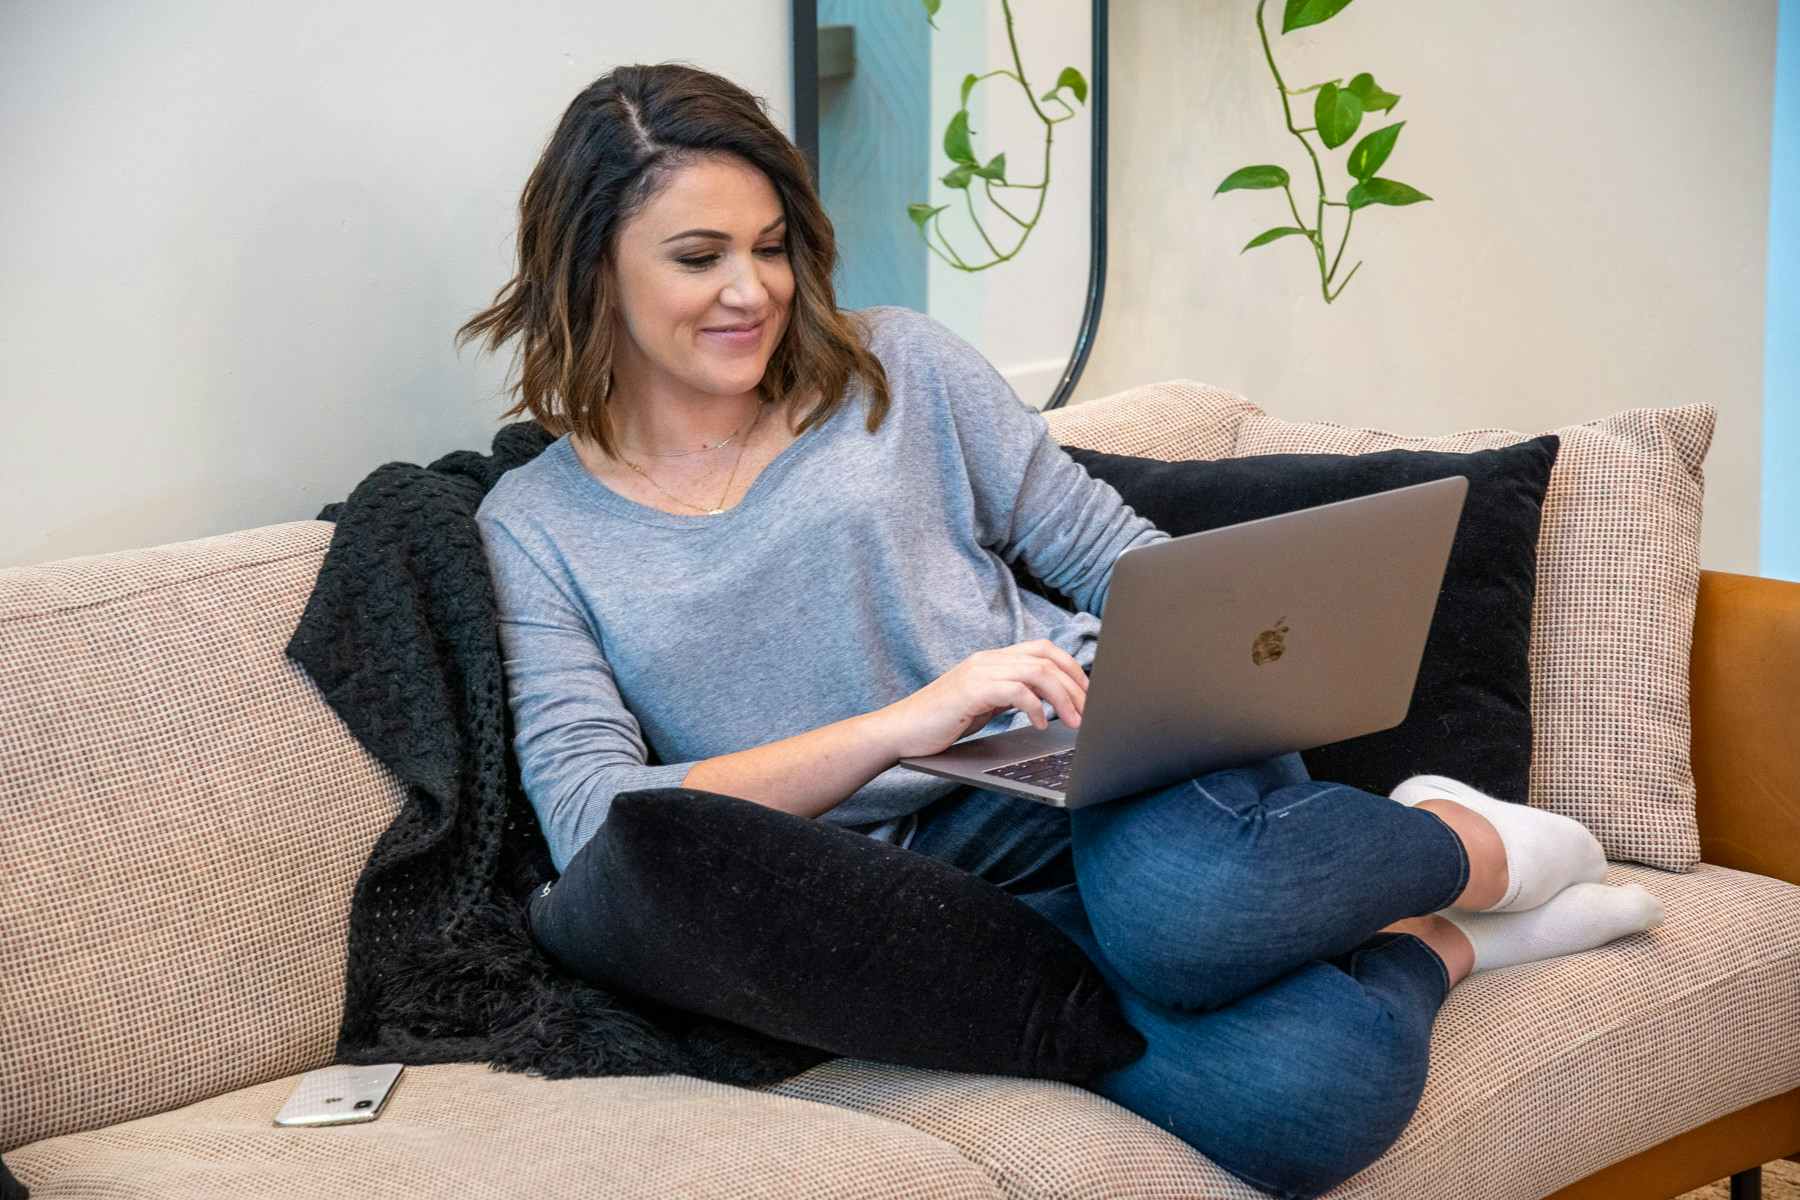 A woman sitting on a sofa looking at a laptop computer